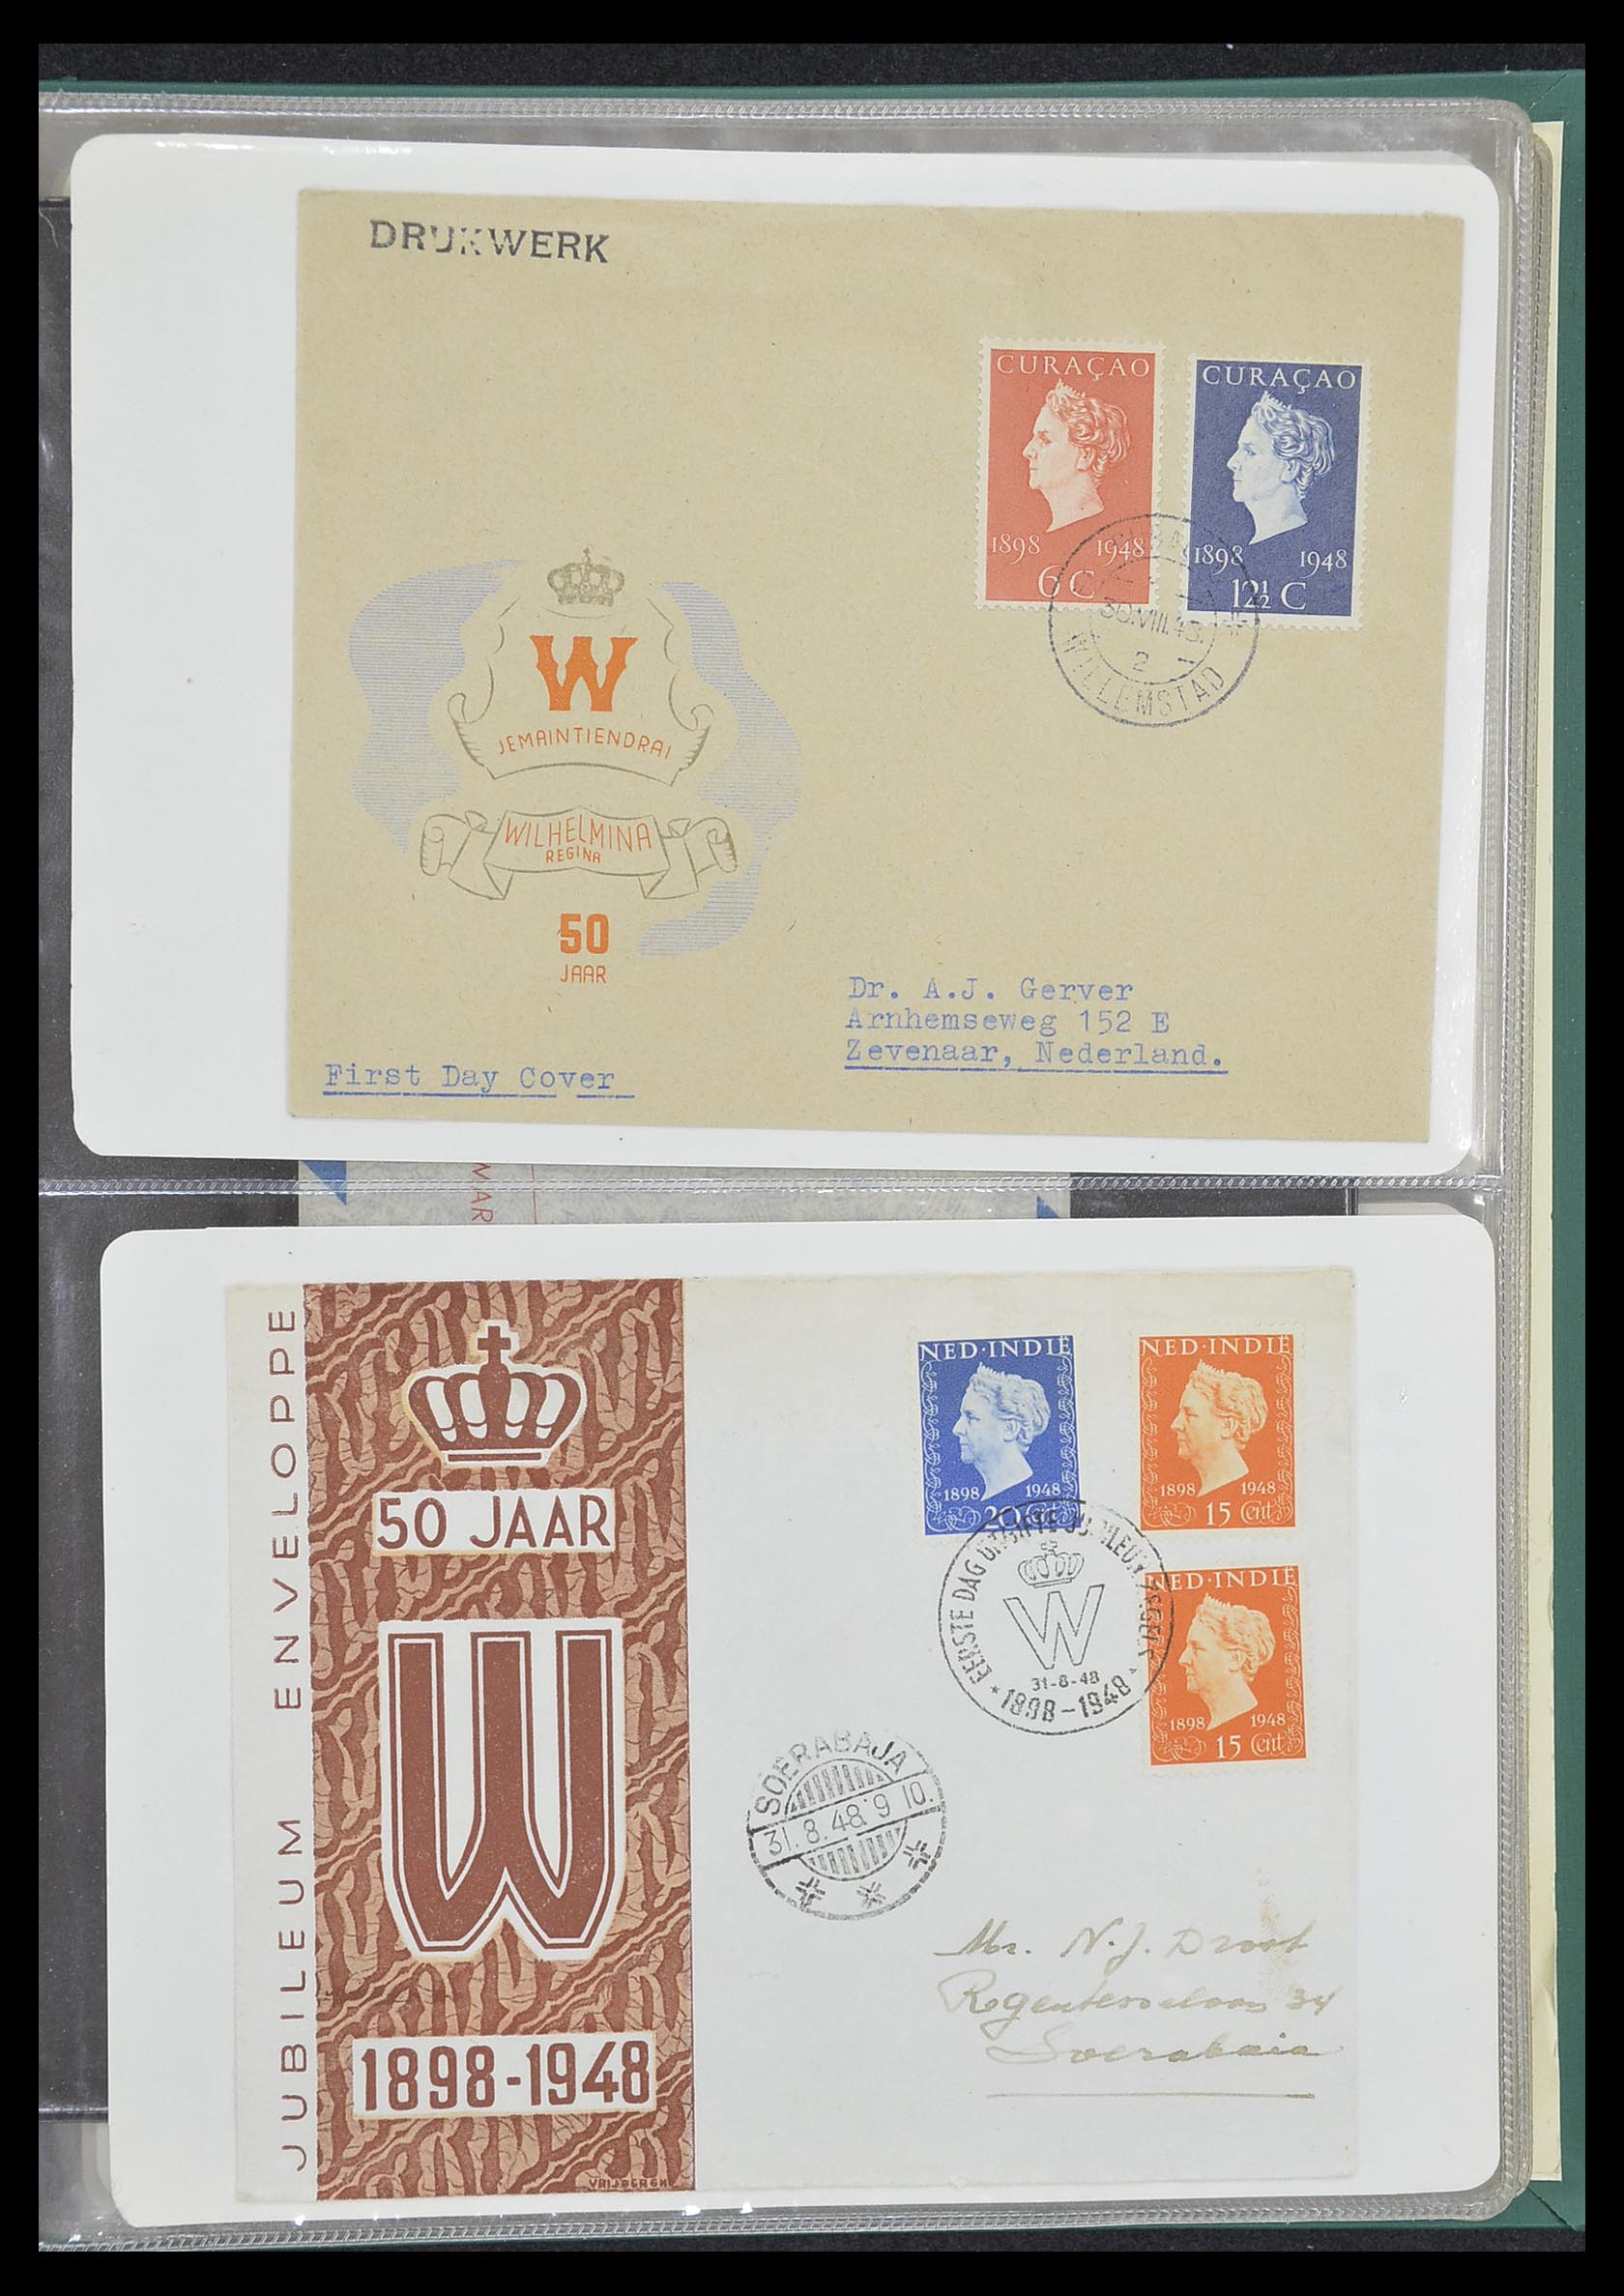 33333 045 - Stamp collection 33333 Dutch territories covers 1873-1959.